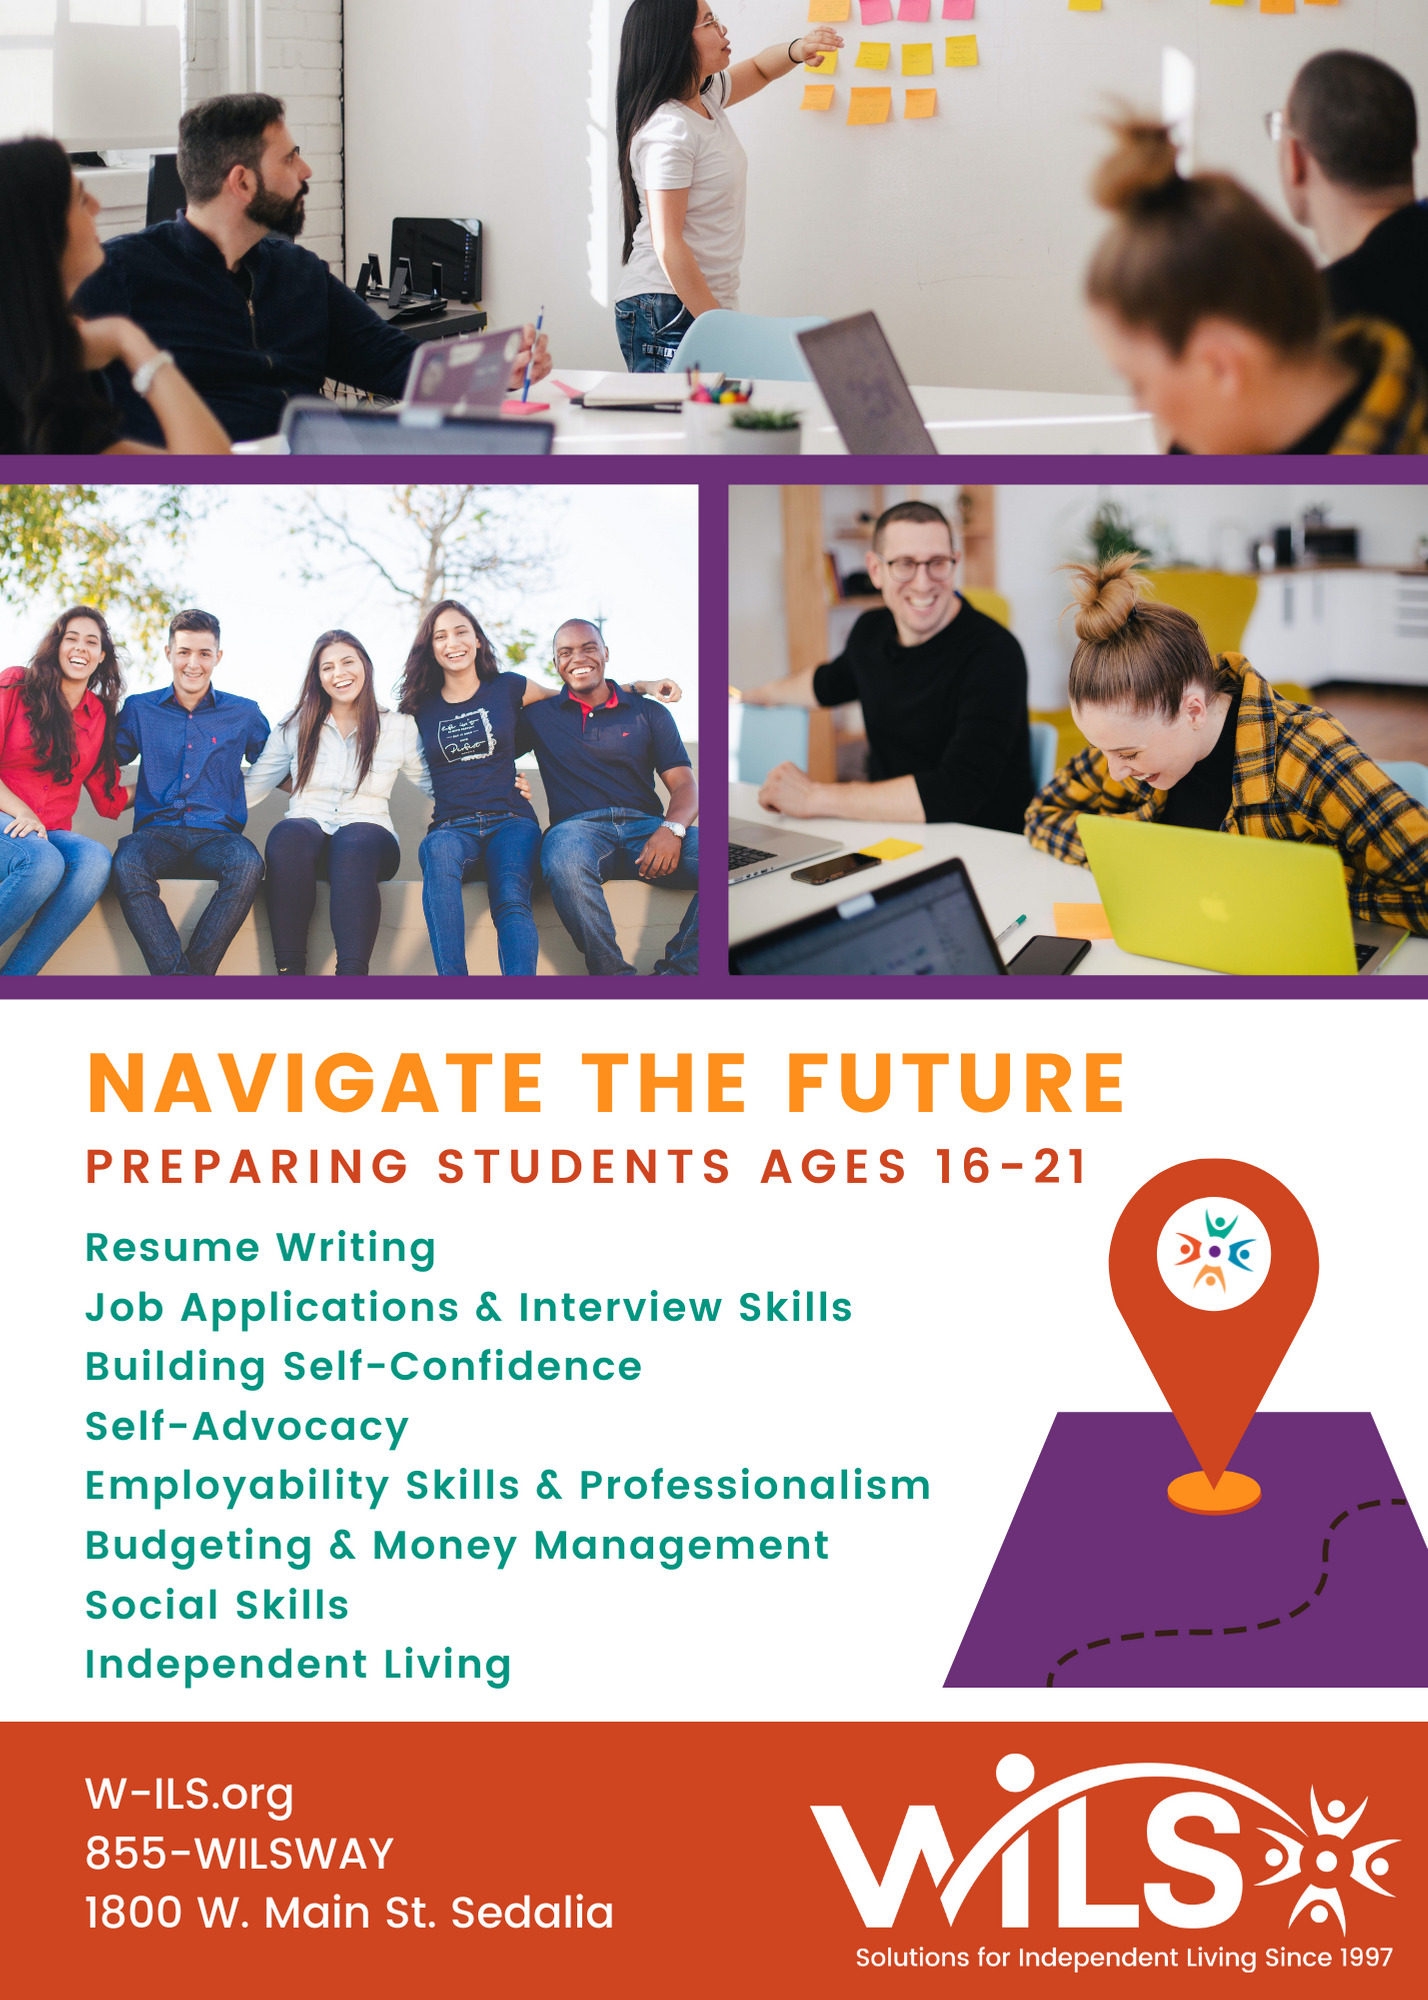 Students ages 16-21 can learn to navigate the future with: Resume Writing Job Applications & Interview Skills Building Self-Confidence Self-Advocacy Employability Skills & Professionalism Budgeting & Money Management Social Skills Independent Living